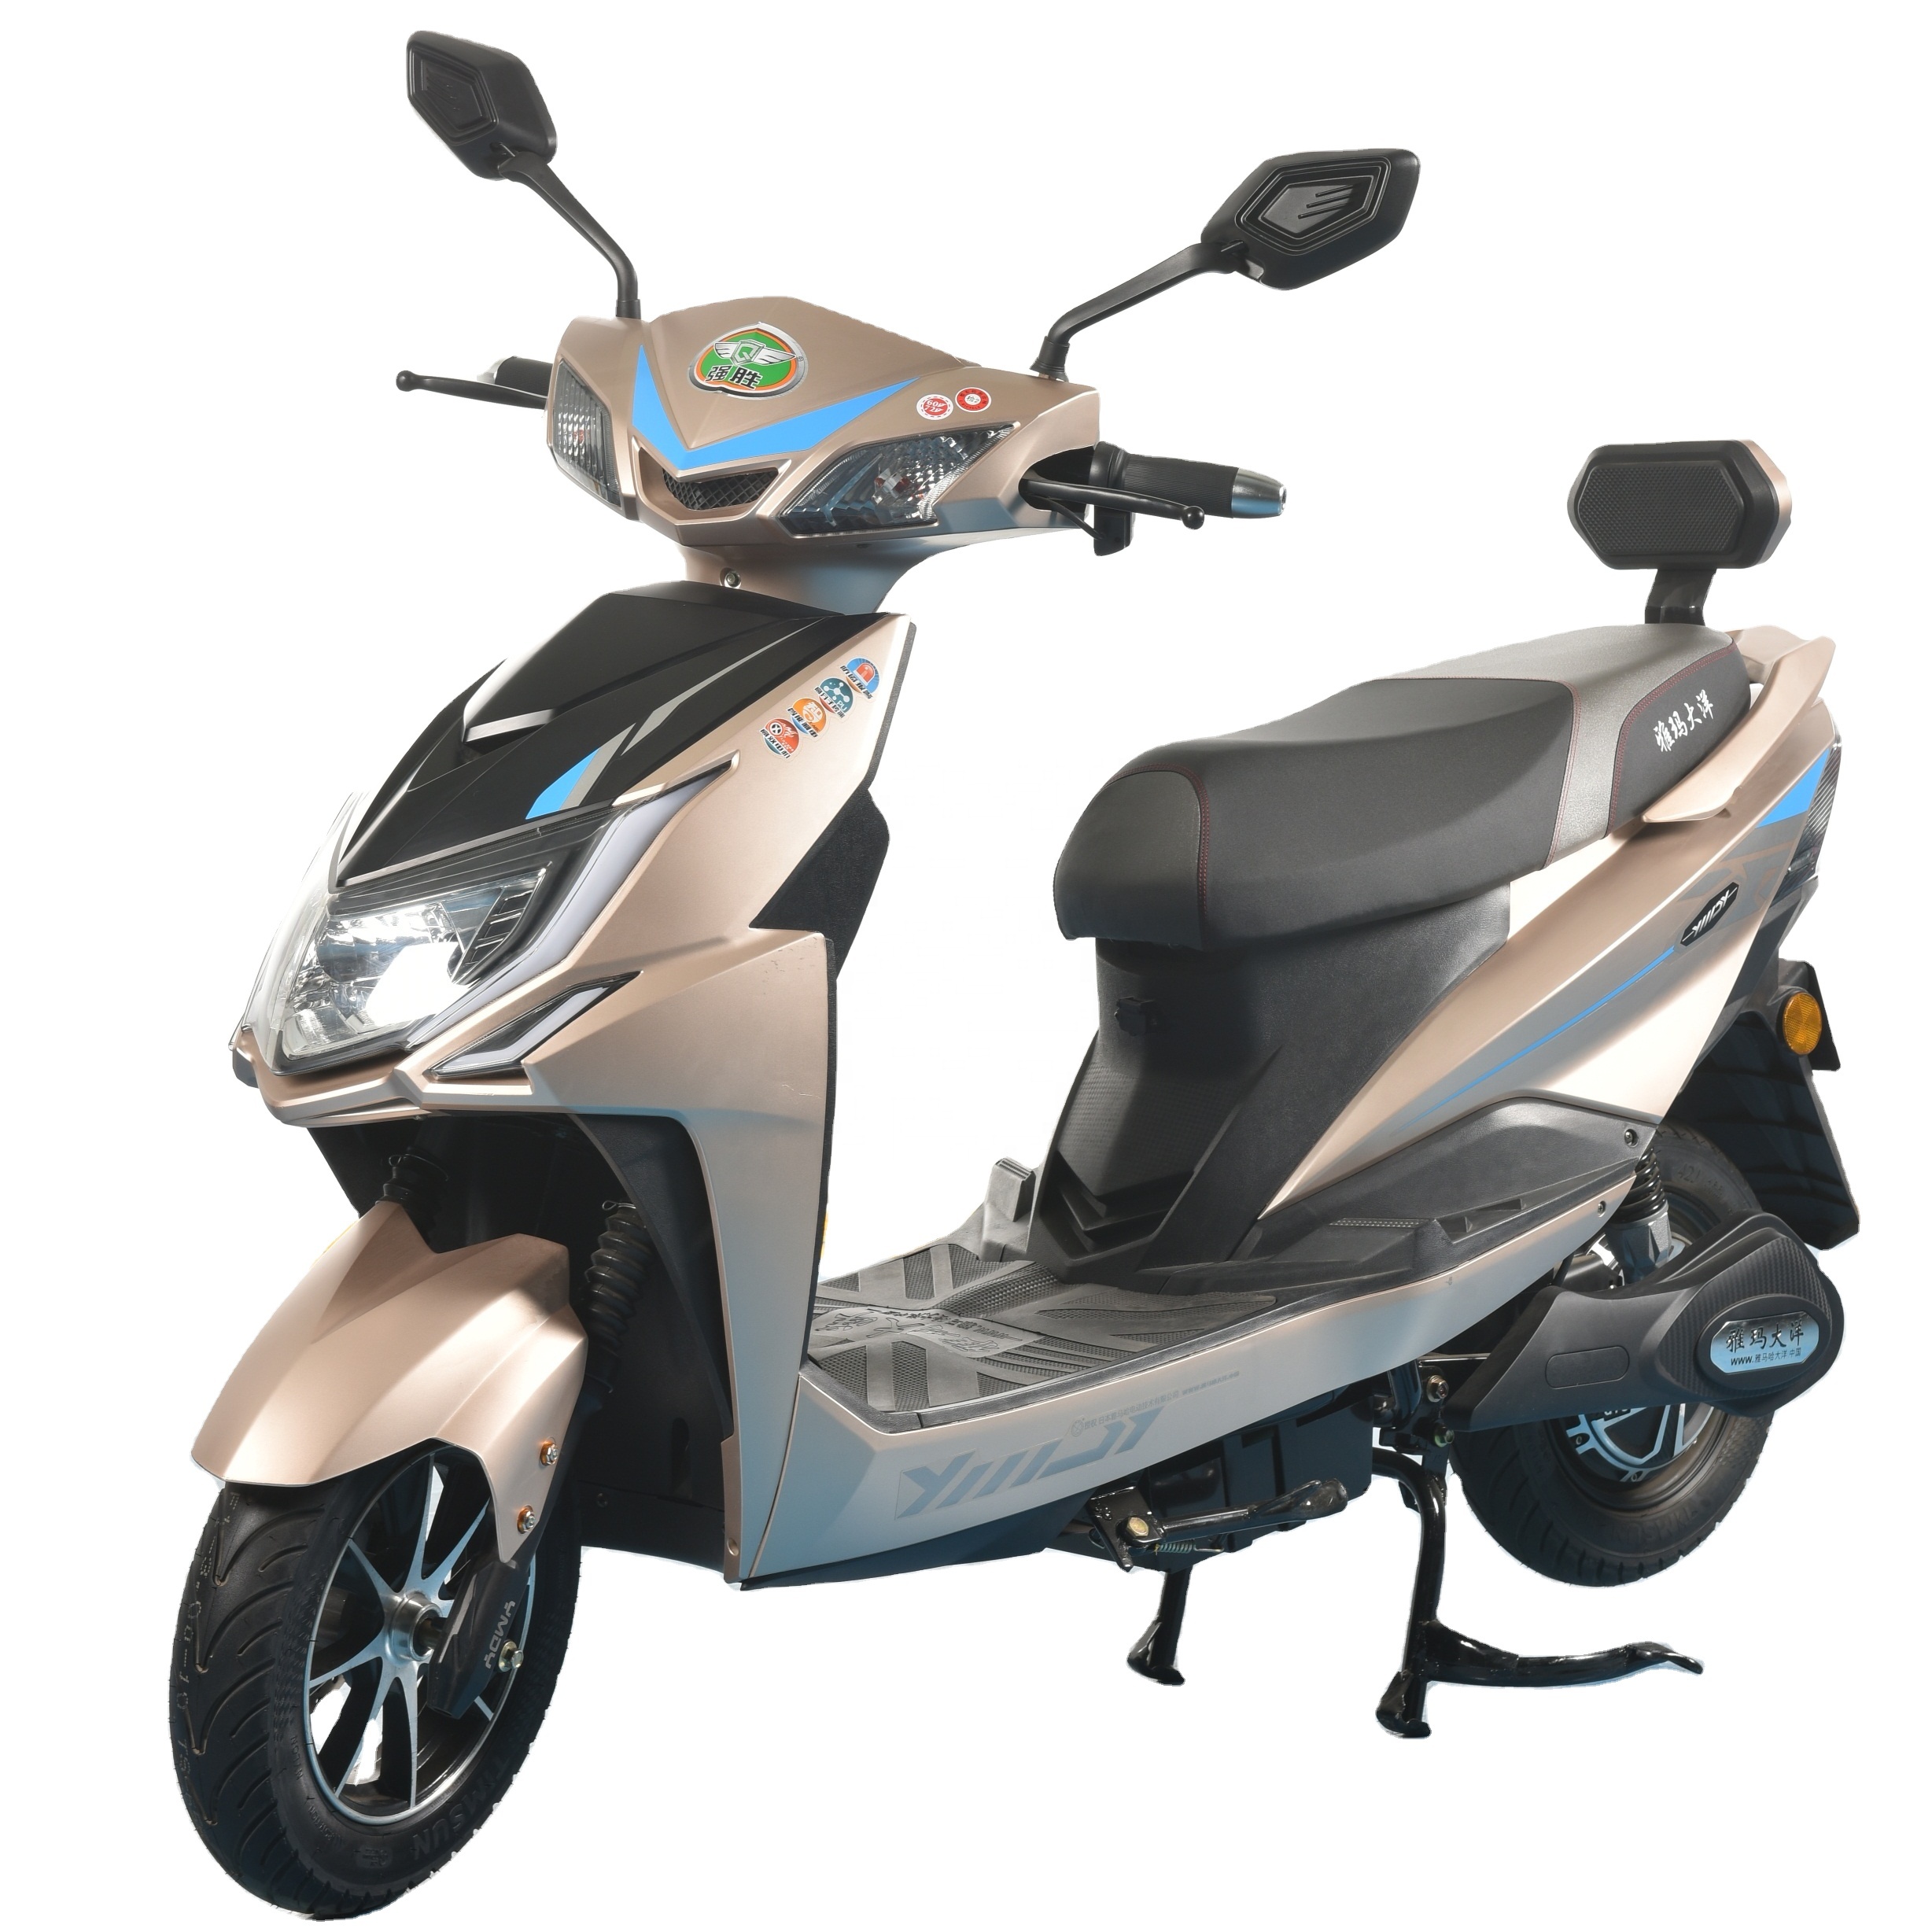 China Wholesale Taxi Passenger Tricycles Pricelist - Electric fat scooter motor motorcycle with motor two wheel e bike supplier – Qiangsheng